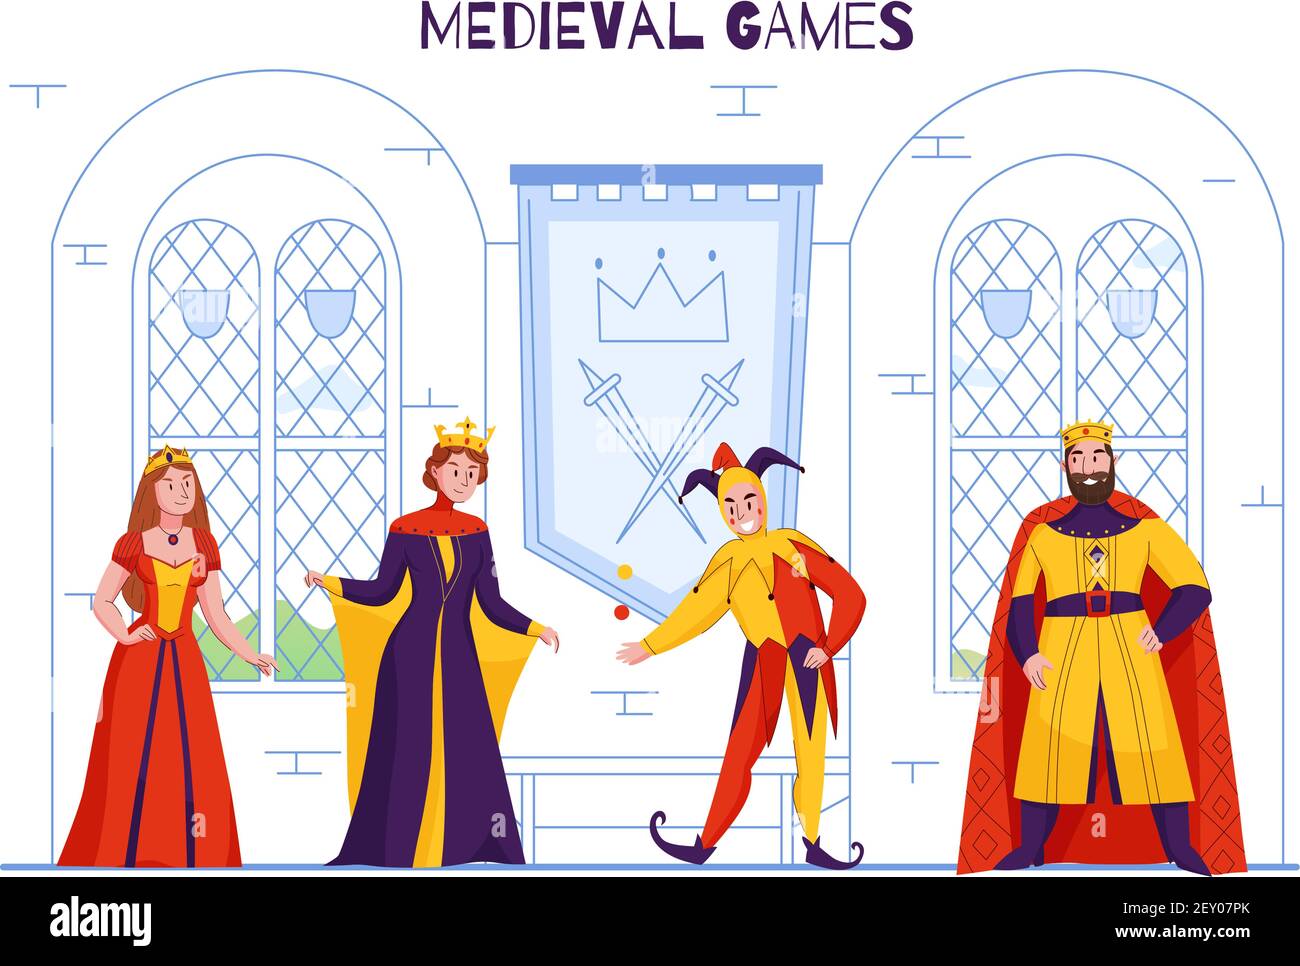 Medieval kingdom court jester in fools hat entertaining monarch juggling joking flat colorful royal characters vector illustration Stock Vector